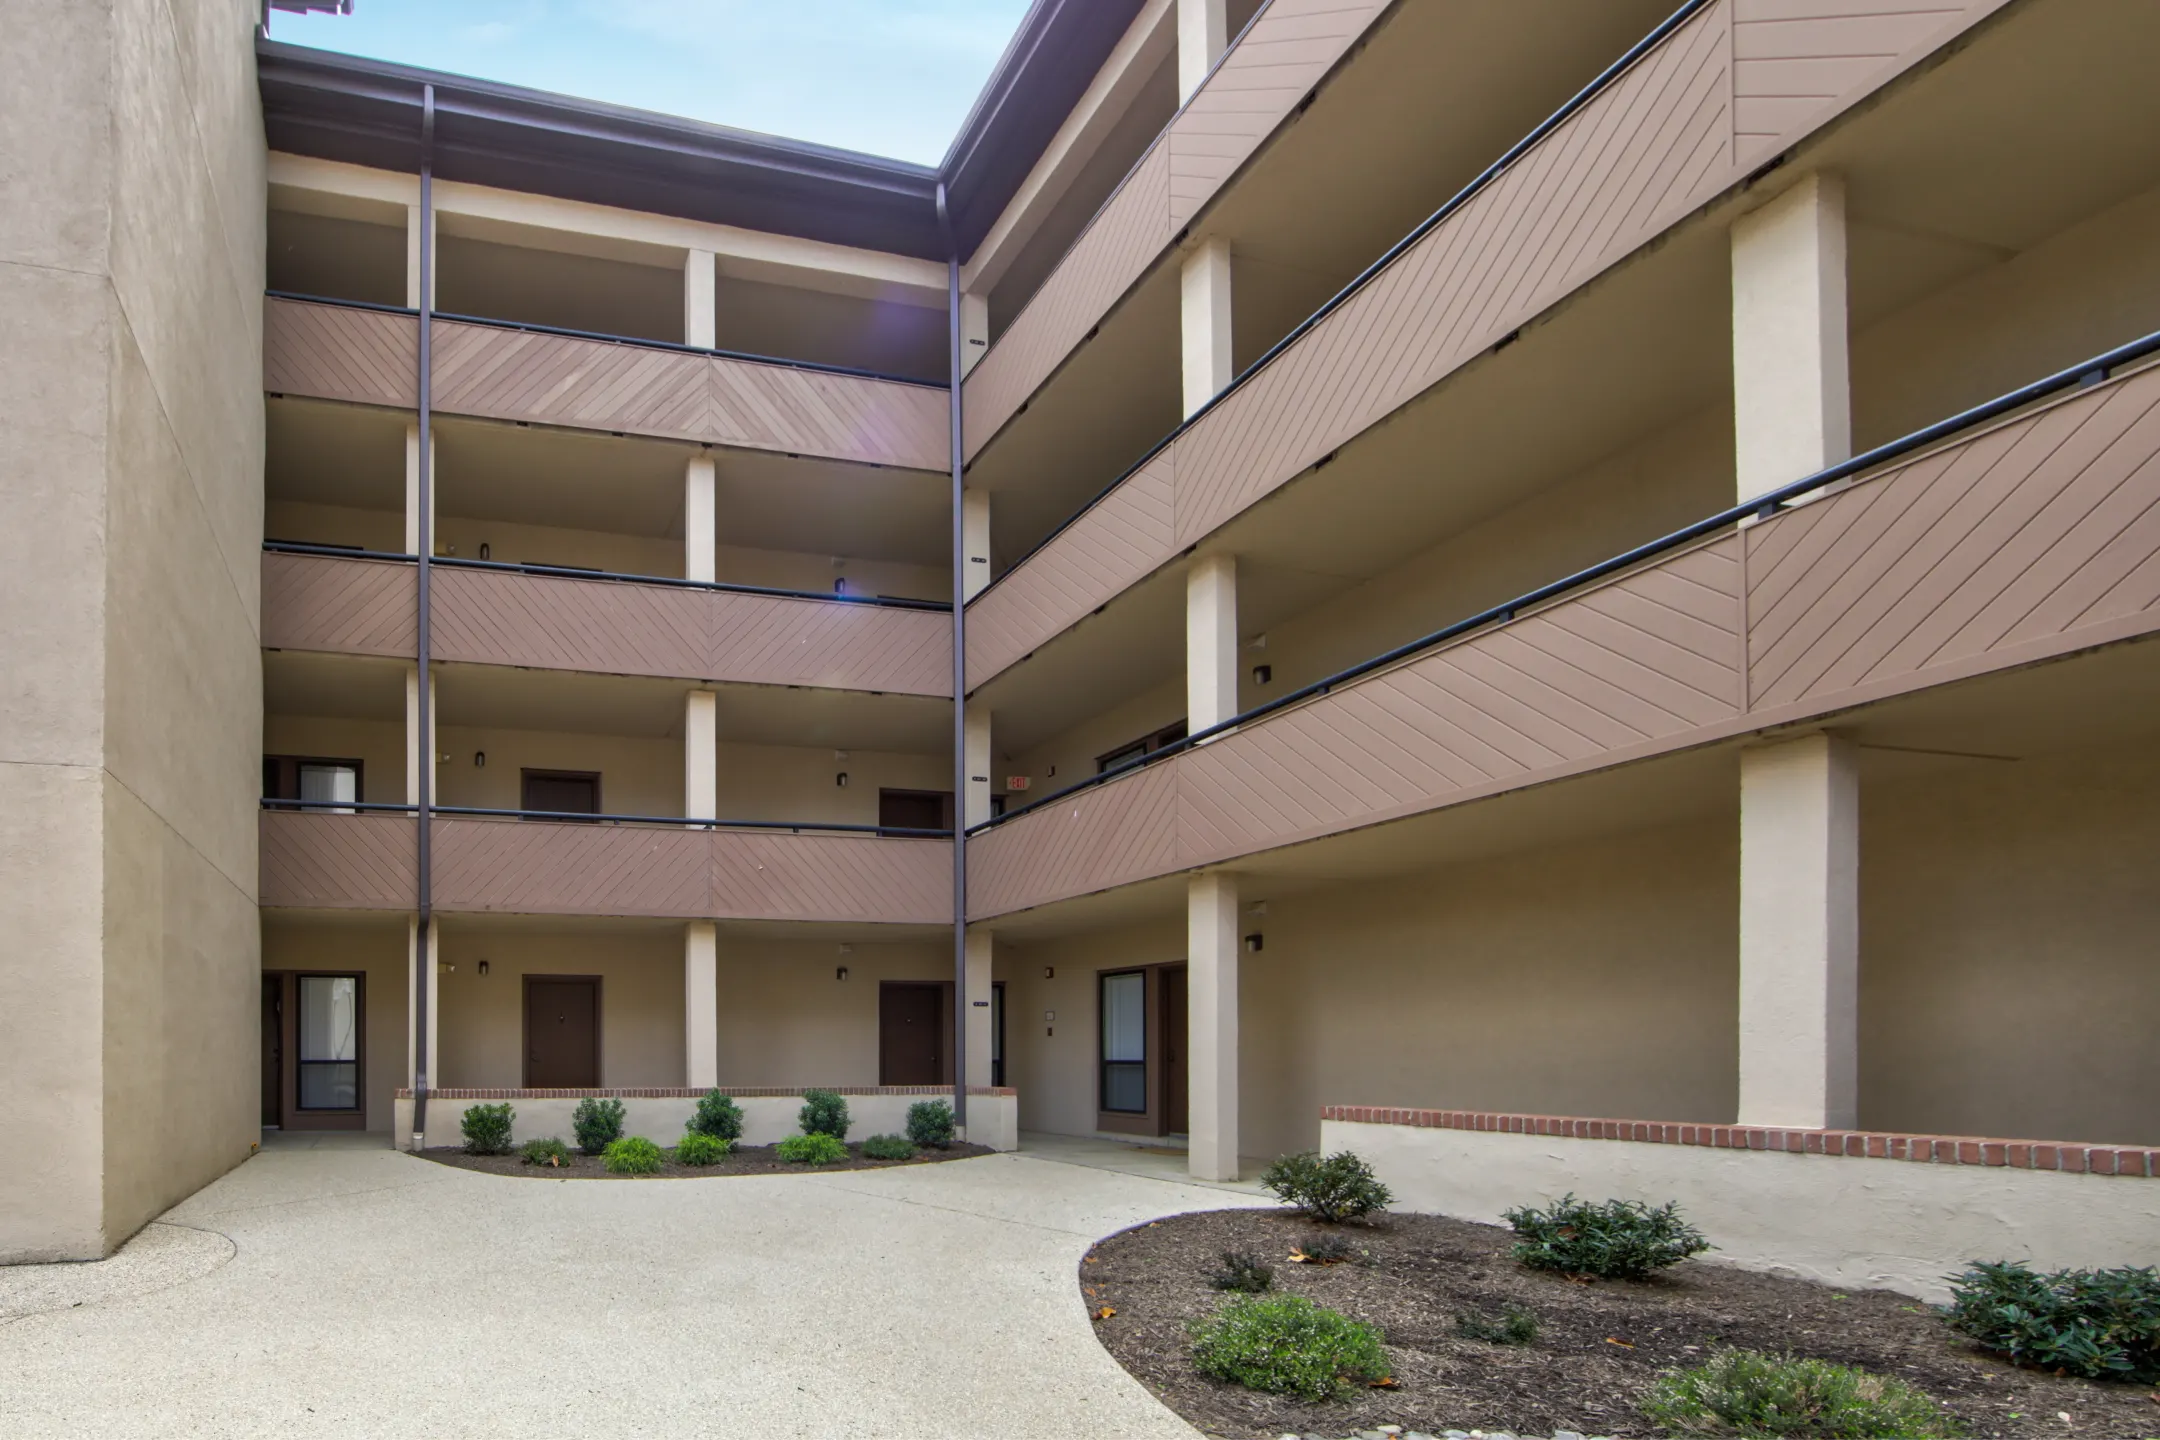 Building - The Apartments at Miramont - Rockville, MD